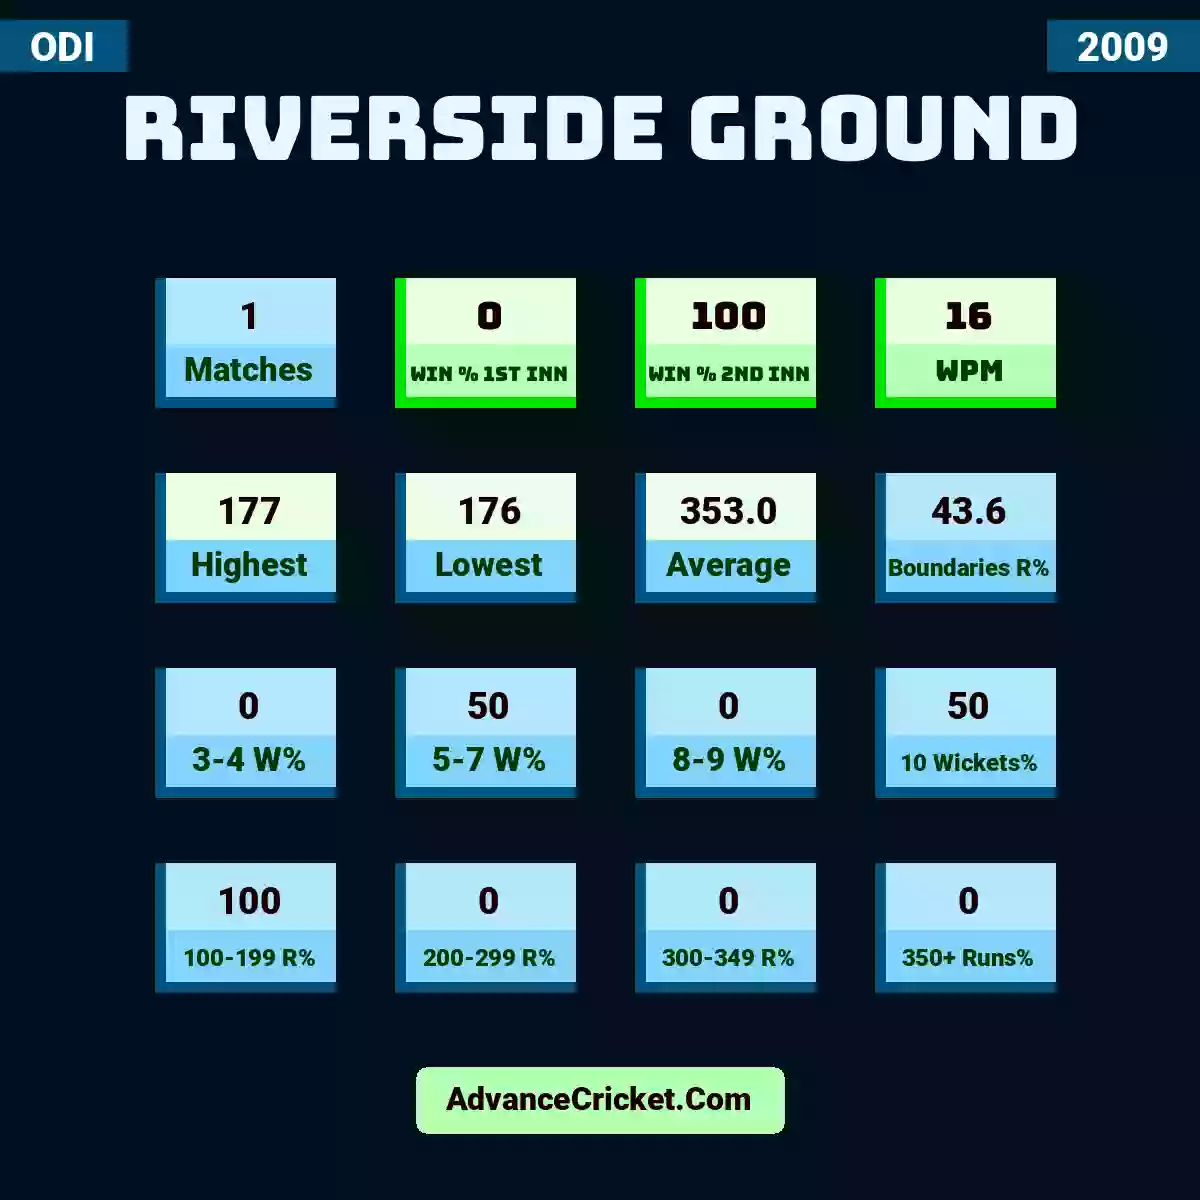 Image showing Riverside Ground with Matches: 1, Win % 1st Inn: 0, Win % 2nd Inn: 100, WPM: 16, Highest: 177, Lowest: 176, Average: 353.0, Boundaries R%: 43.6, 3-4 W%: 0, 5-7 W%: 50, 8-9 W%: 0, 10 Wickets%: 50, 100-199 R%: 100, 200-299 R%: 0, 300-349 R%: 0, 350+ Runs%: 0.